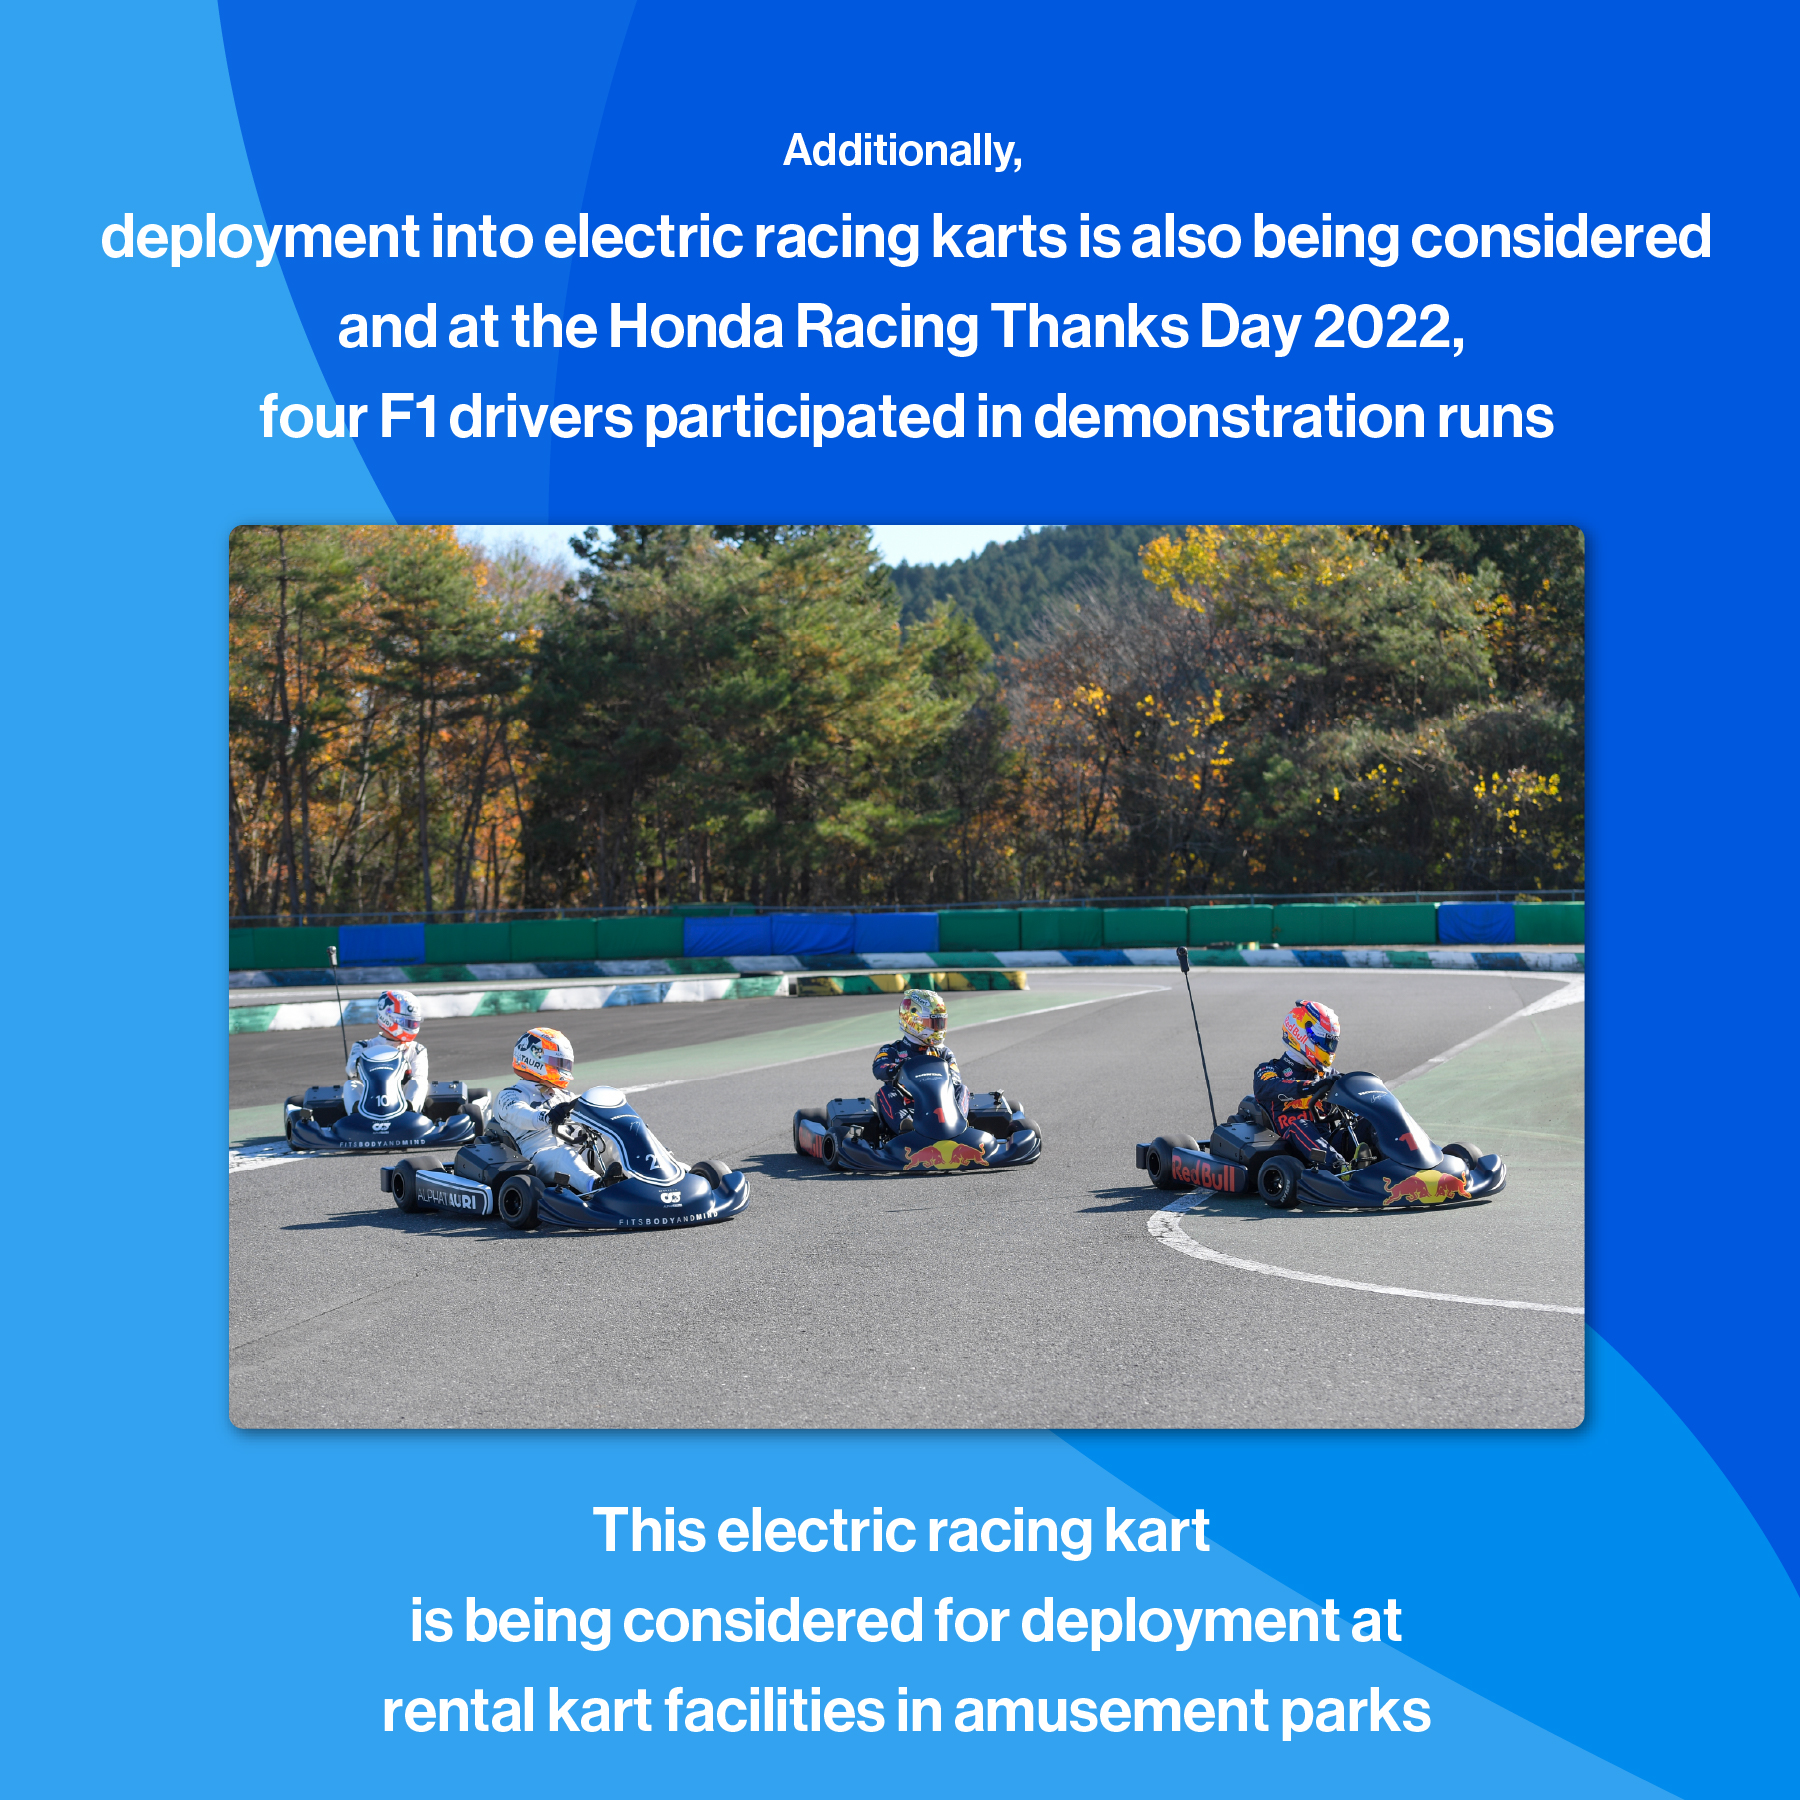 Deployment of the Mobile Power Pack to electric racing karts